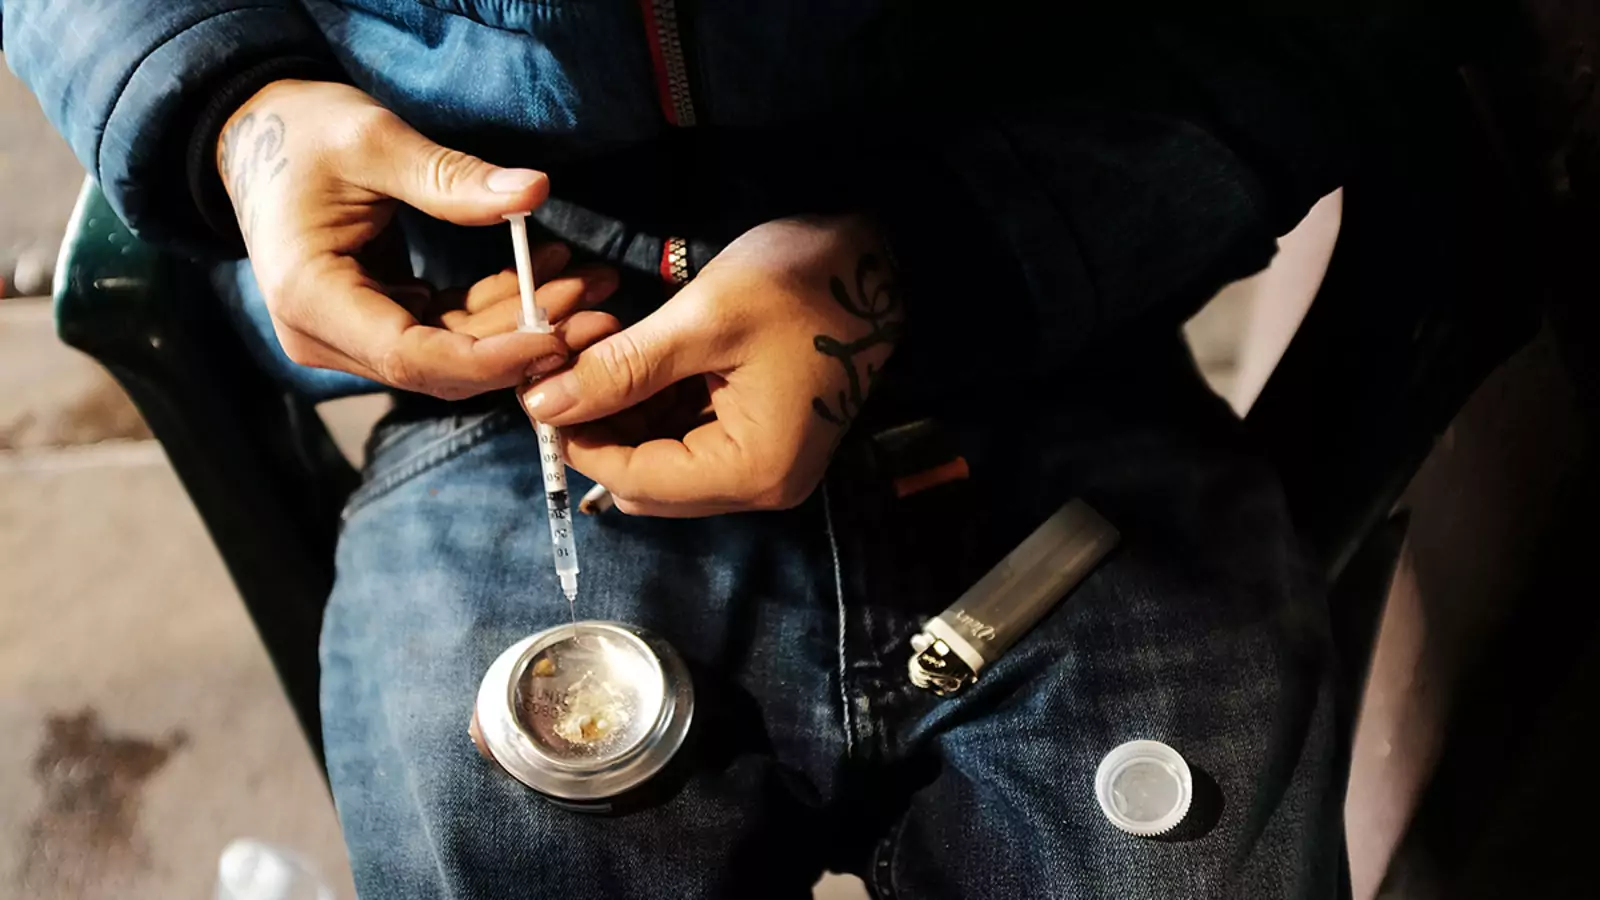 How Can an Increased Rate of Addiction Hurt Our Country?